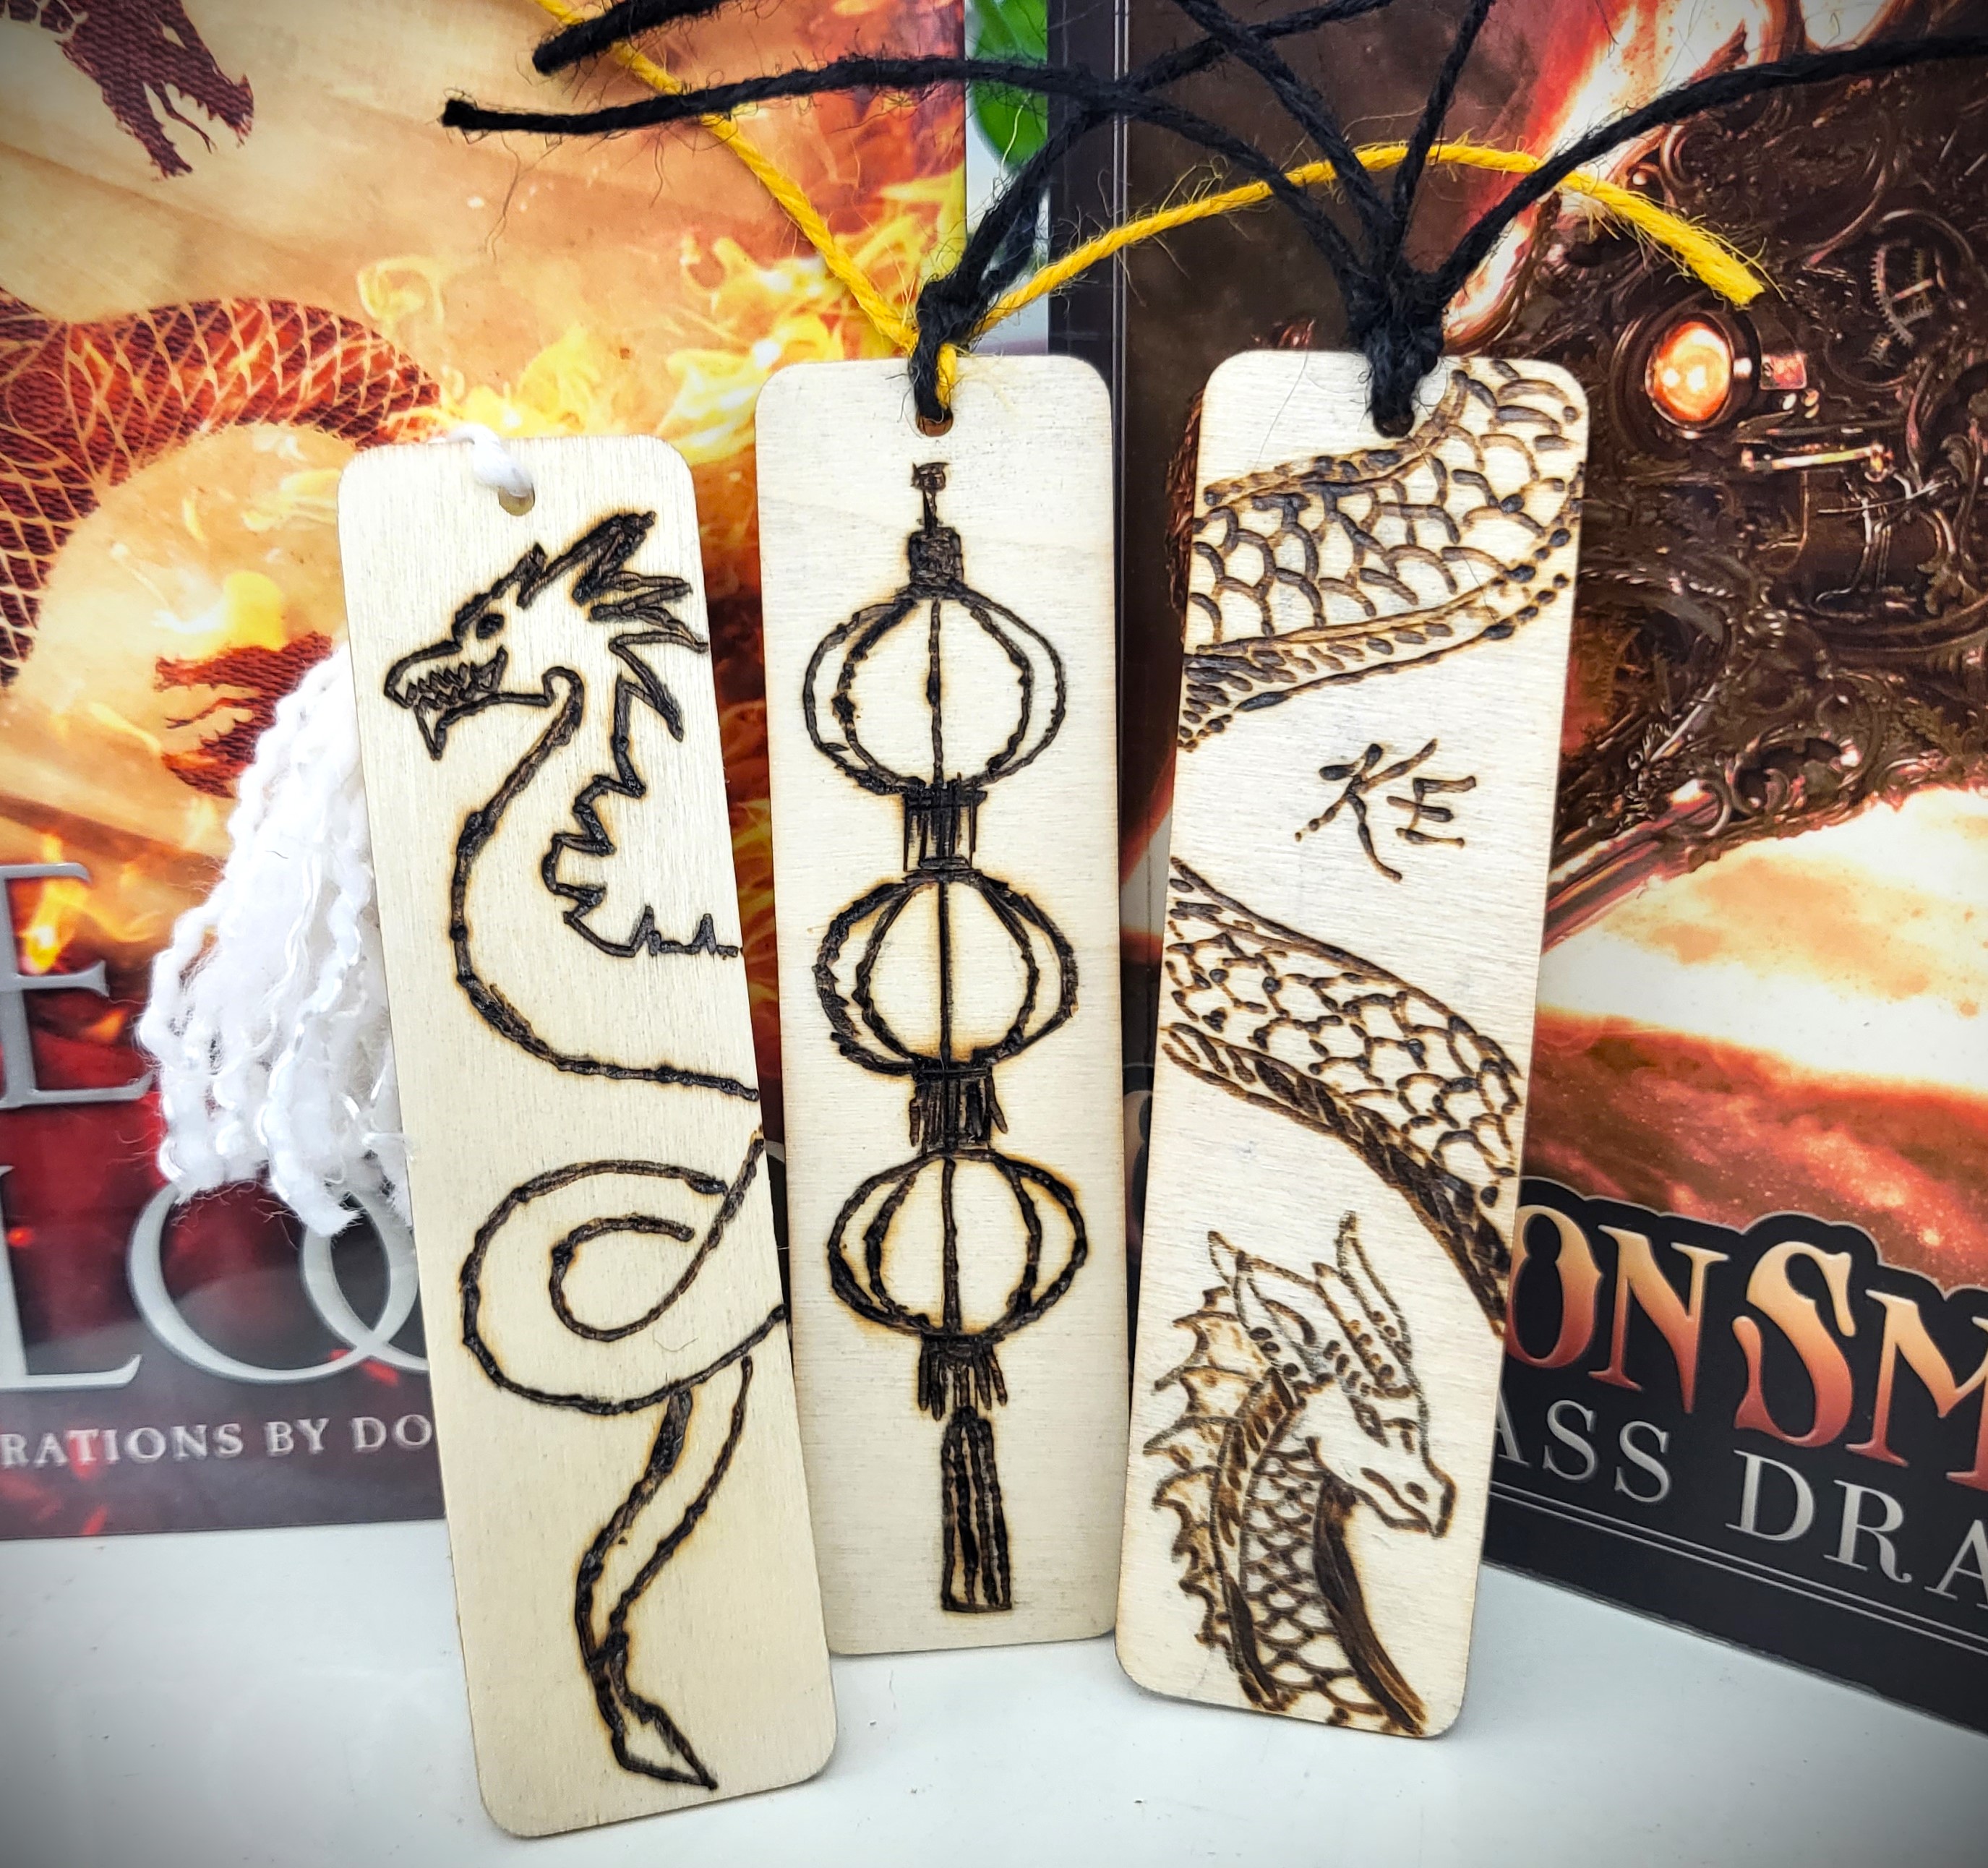 Image of woodburned bookmarks with images of dragons and lanterns